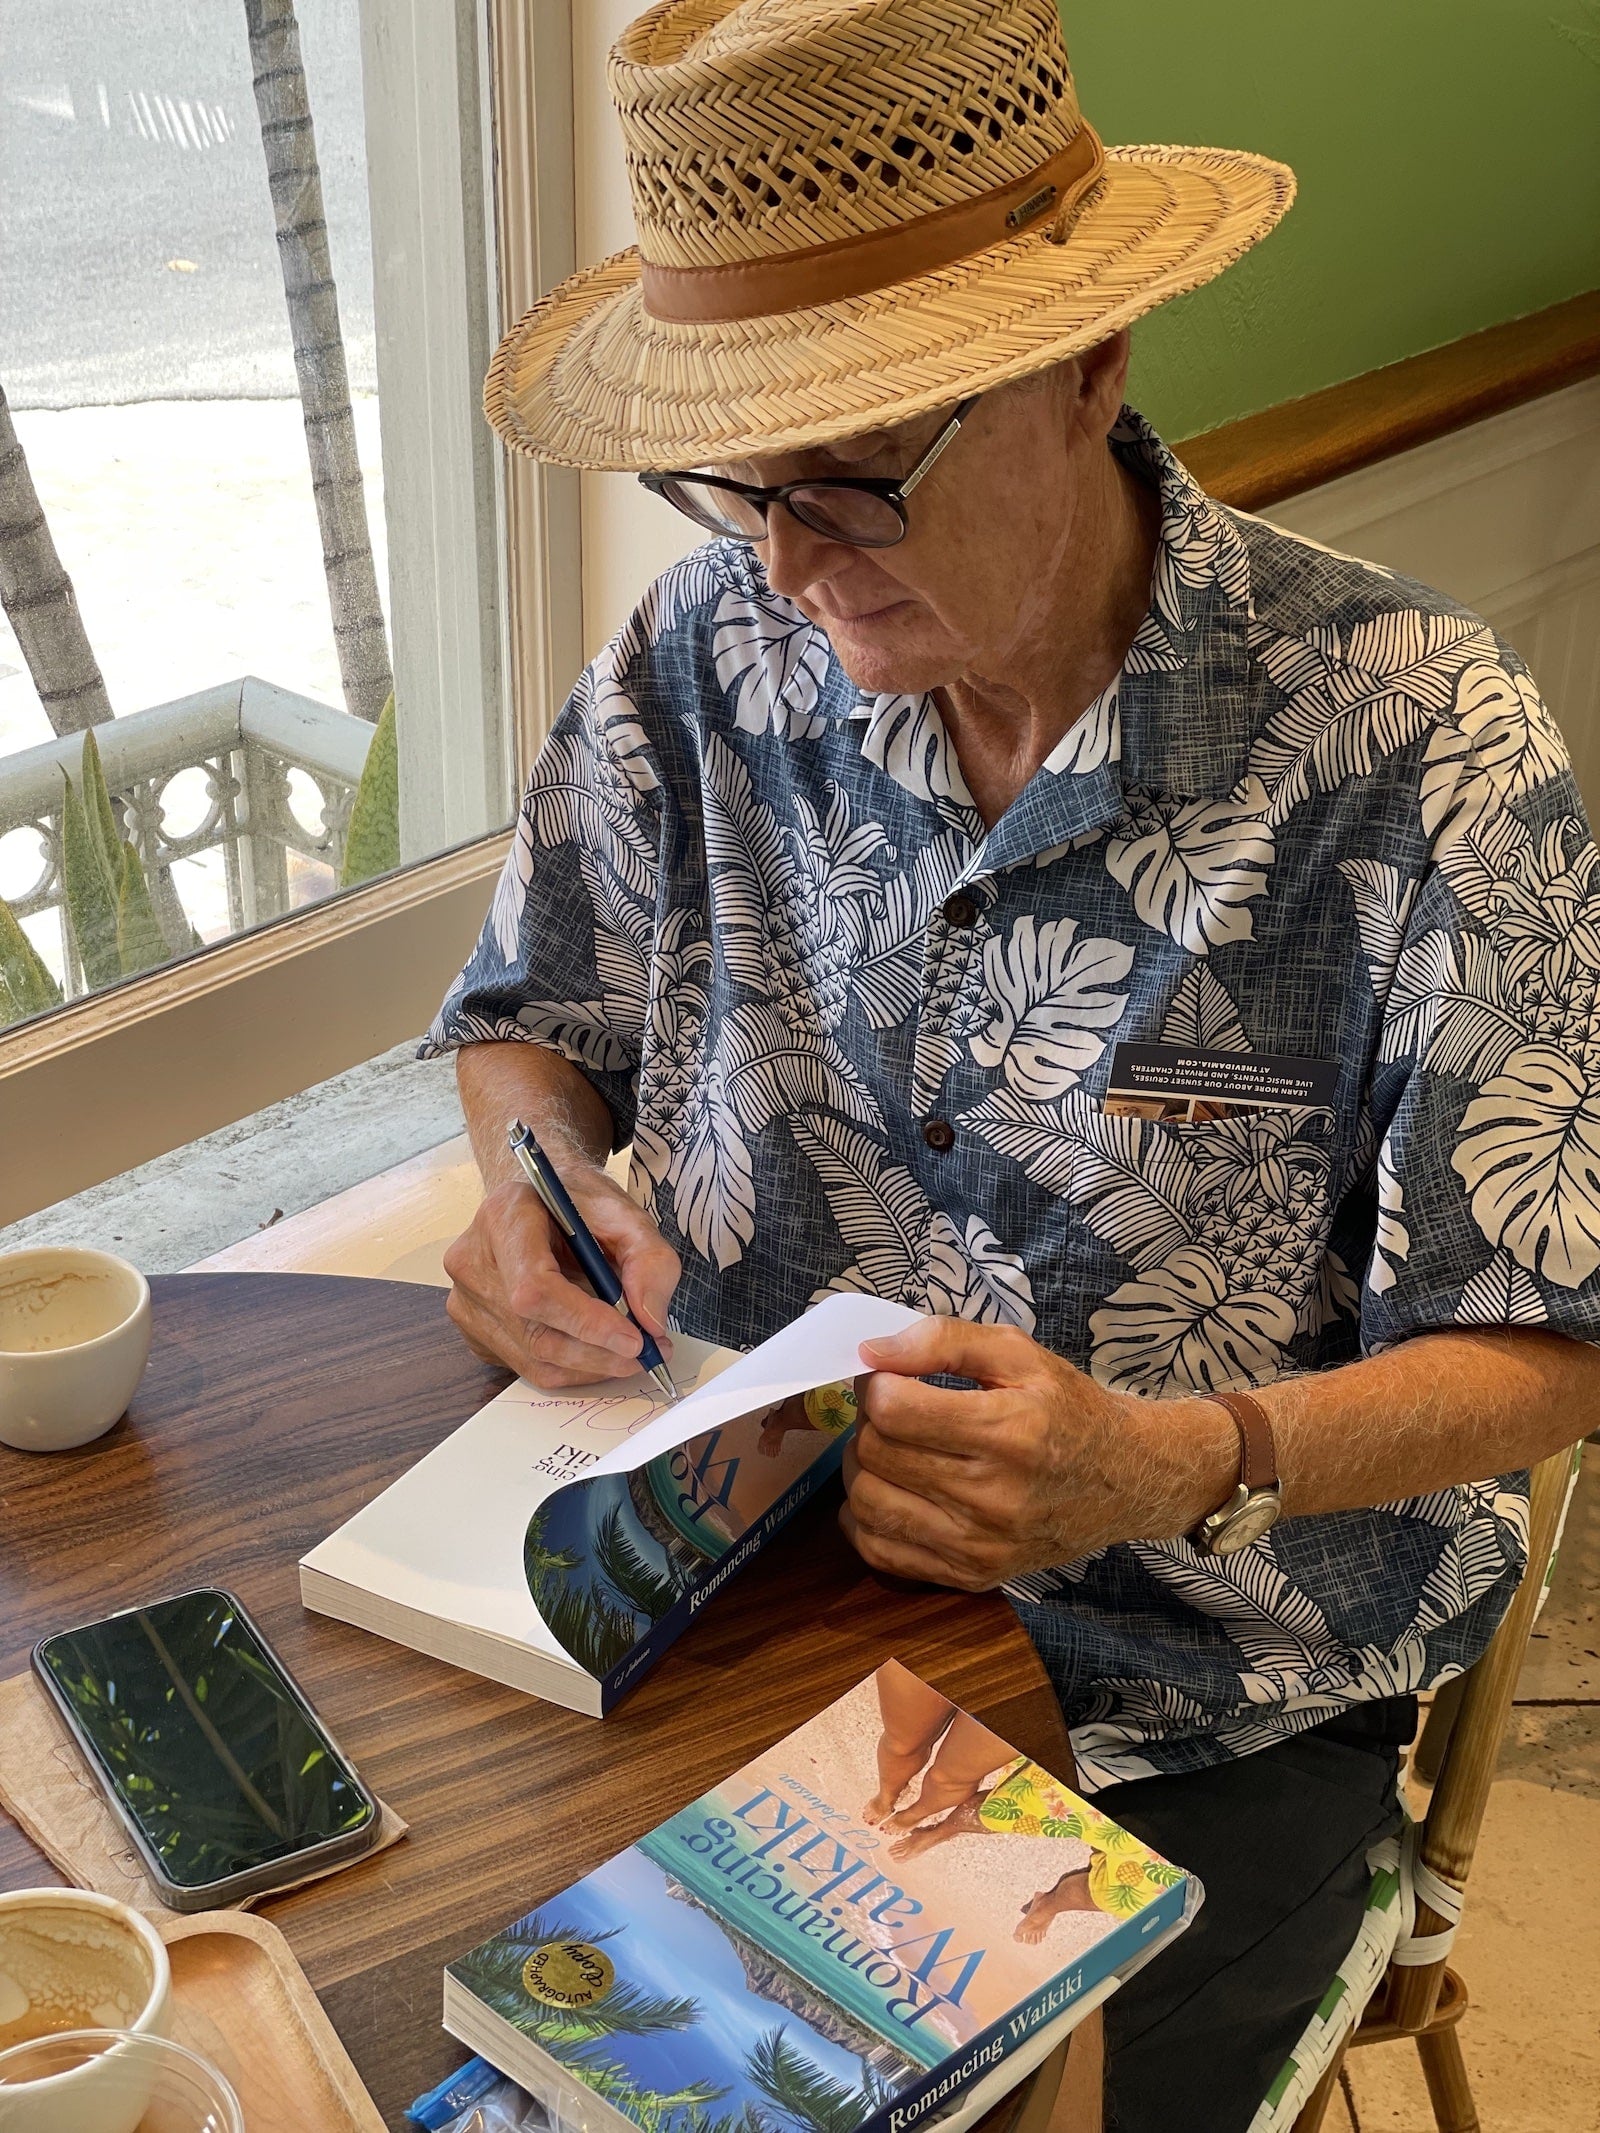 Charles signing a book inside the Honolulu Coffee Moana Surfrider cafe